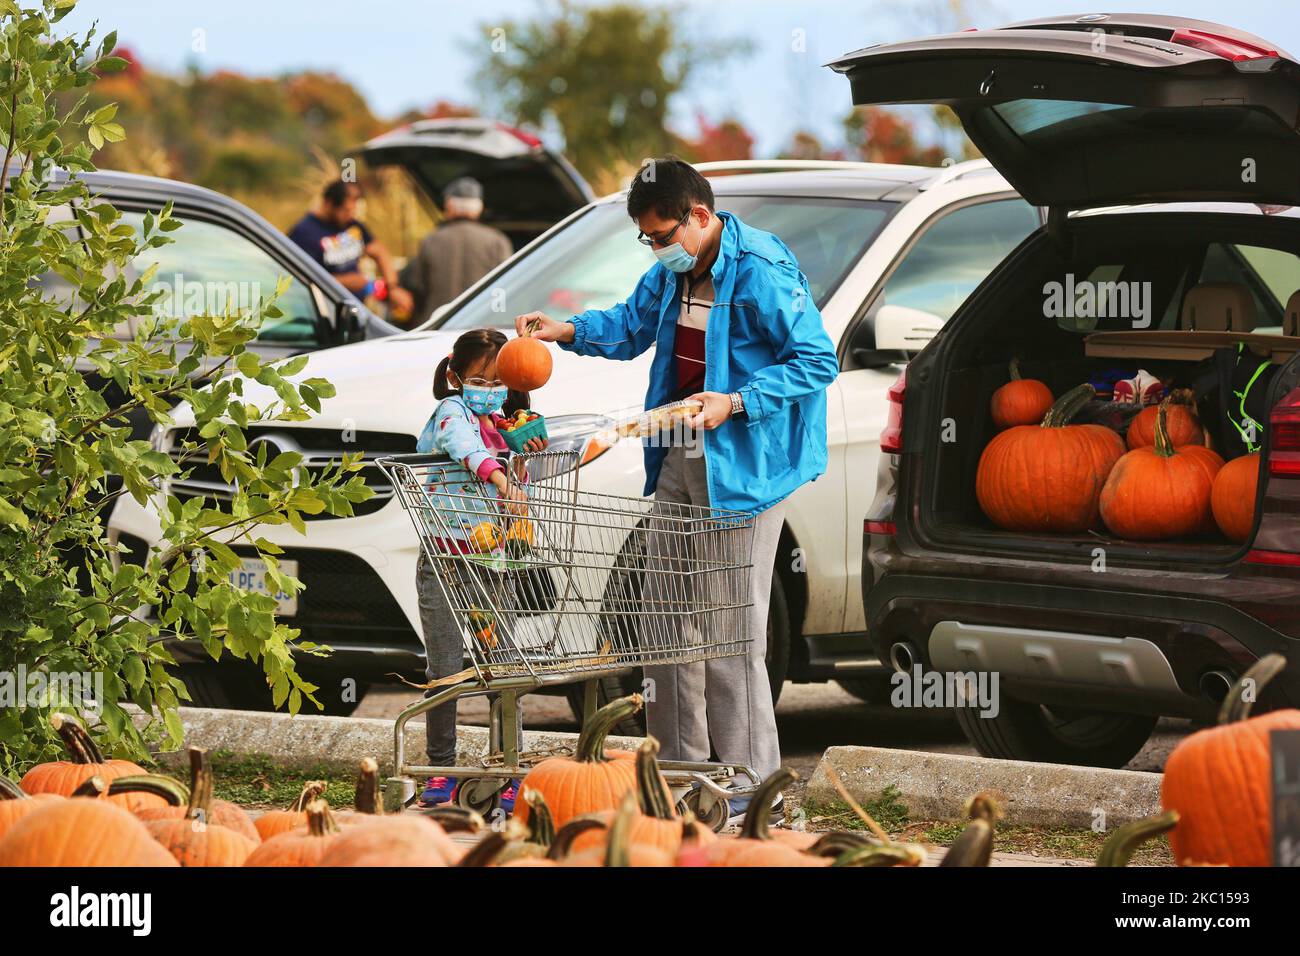 People wearing face masks to protect them from the novel coronavirus (COVID-19) select pumpkins for Thanksgiving and Halloween at a farm in Markham, Ontario, Canada, on October 03, 2020. Cases of COVID-19 continue to rise, with record daily numbers across the Greater Toronto Area. Calls to place the city of Toronto back into lockdown to slow the spread of the virus are mounting from healthcare officials. (Photo by Creative Touch Imaging Ltd./NurPhoto) Stock Photo